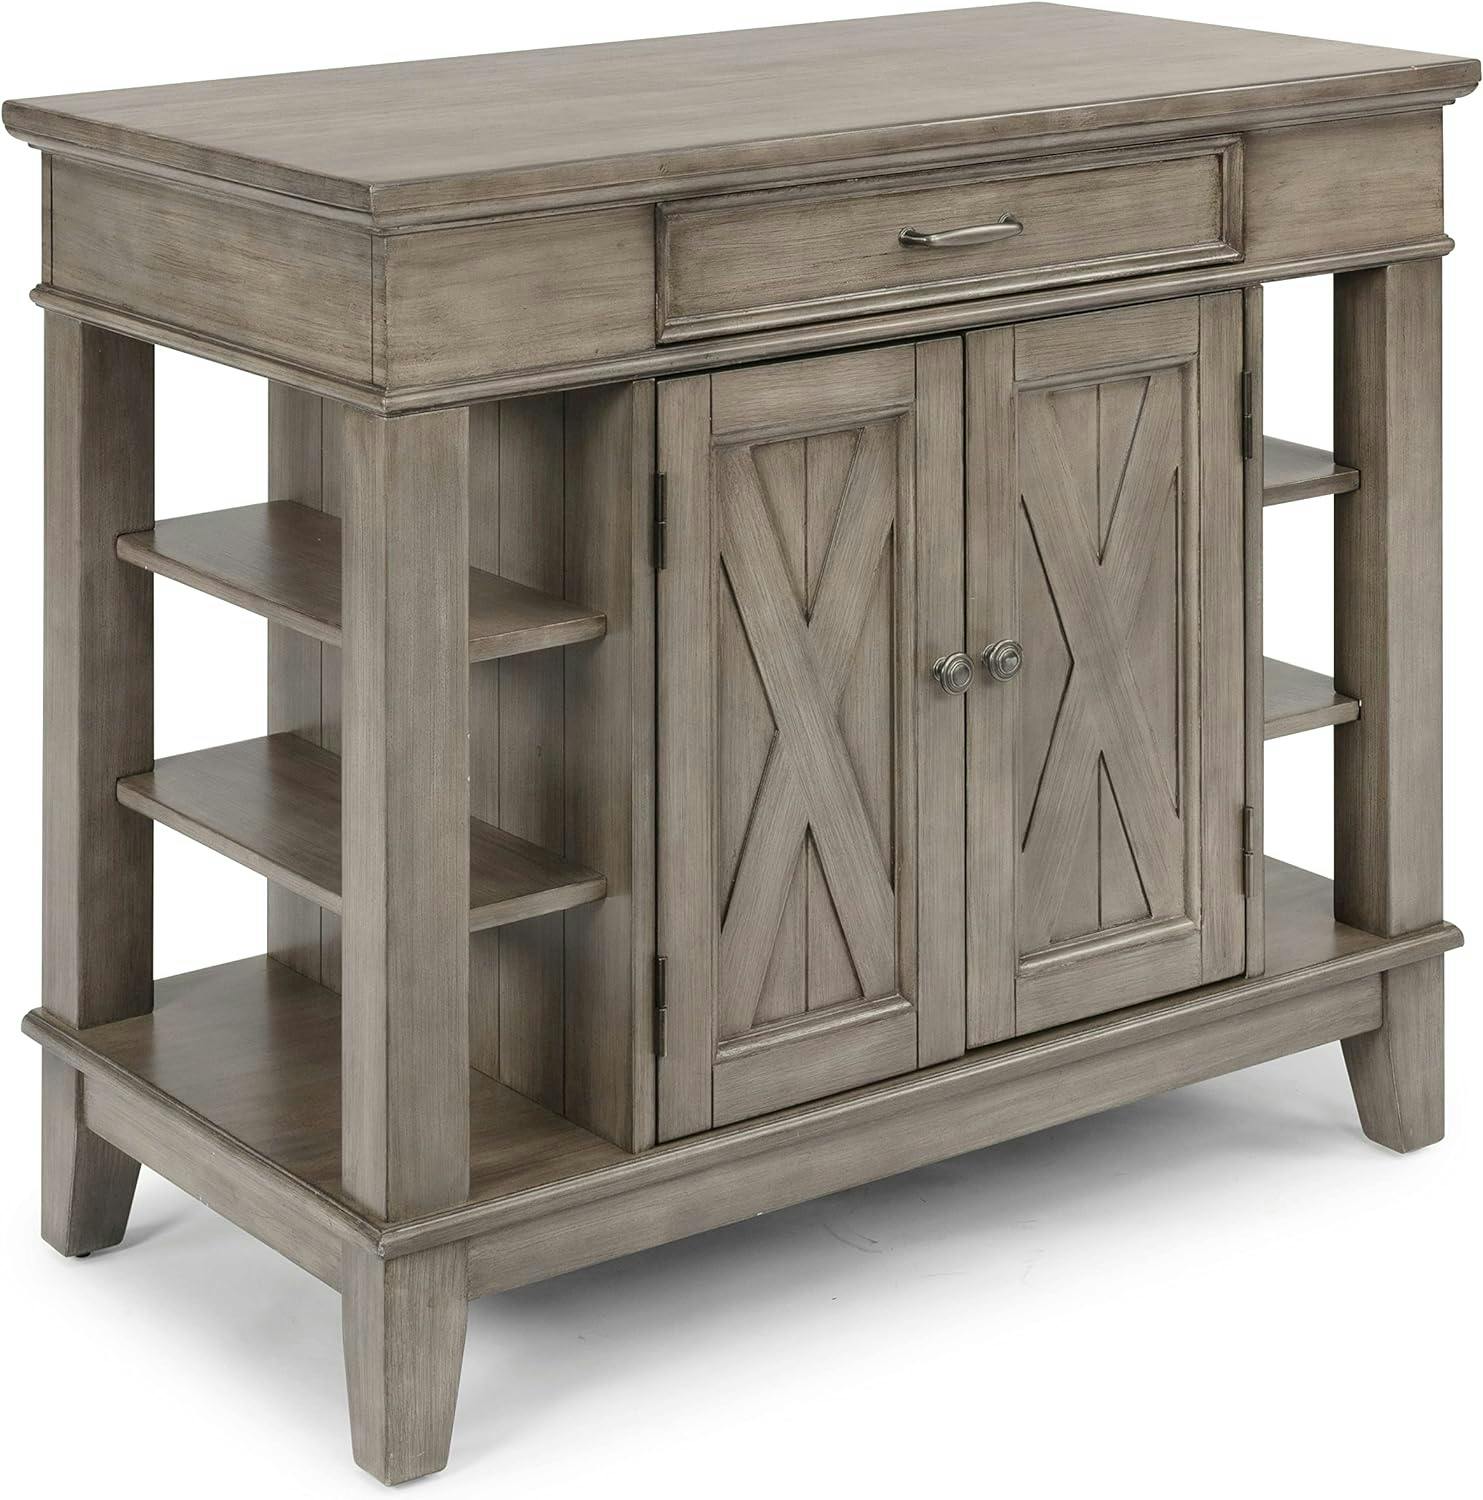 Rustic Multi-Gray Solid Wood Kitchen Island with Storage